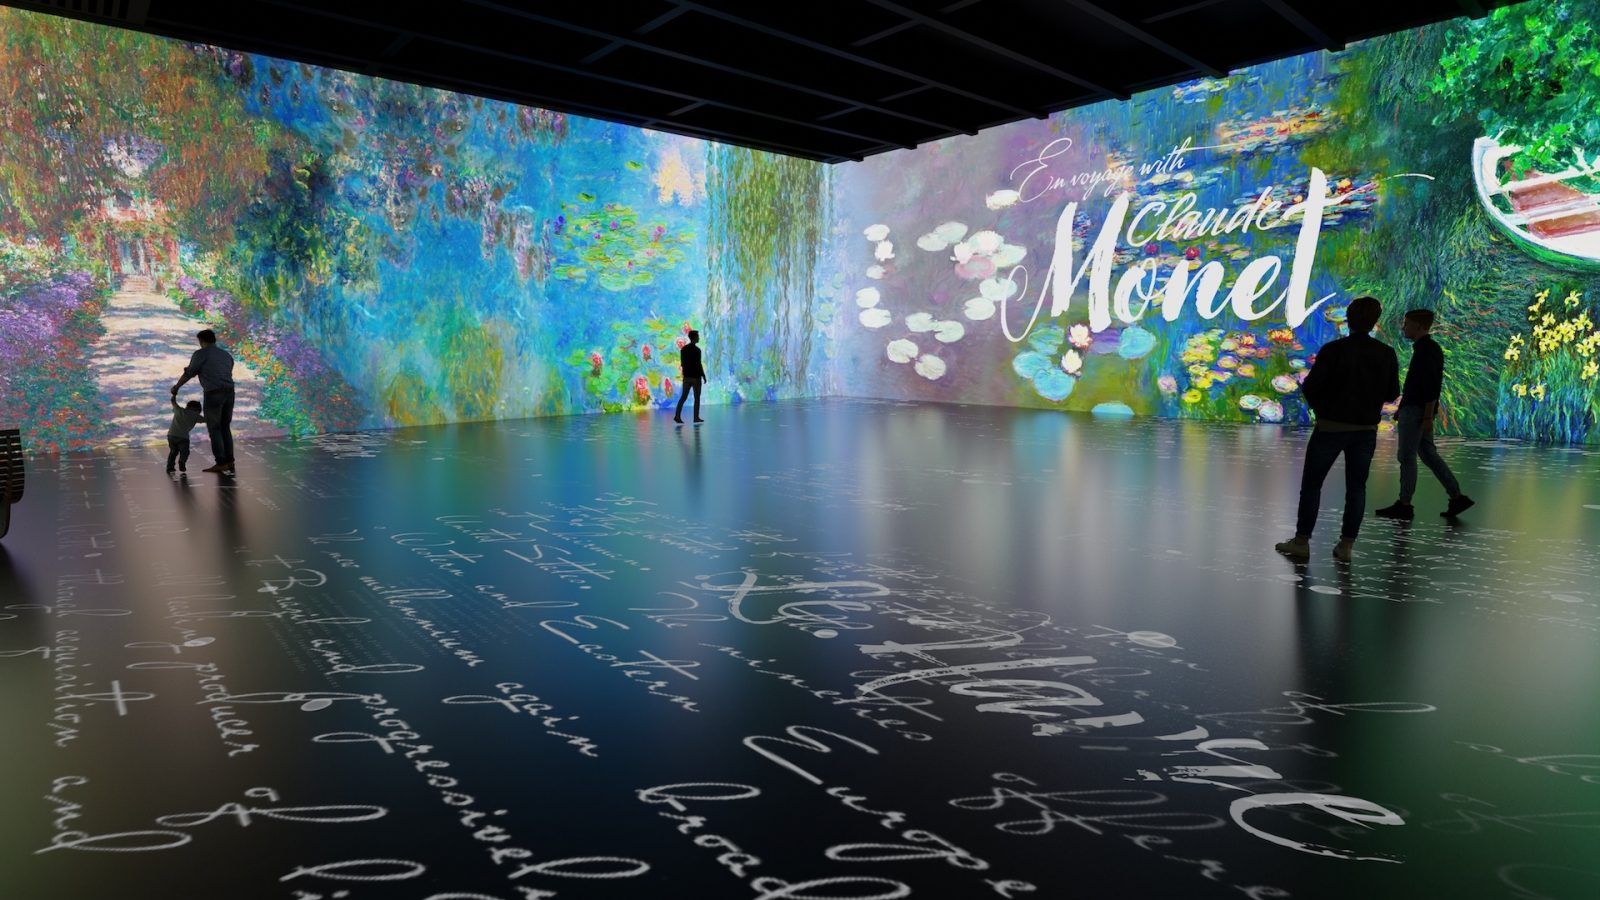 Monet’s digital art experience is coming to the West Kowloon Cultural District